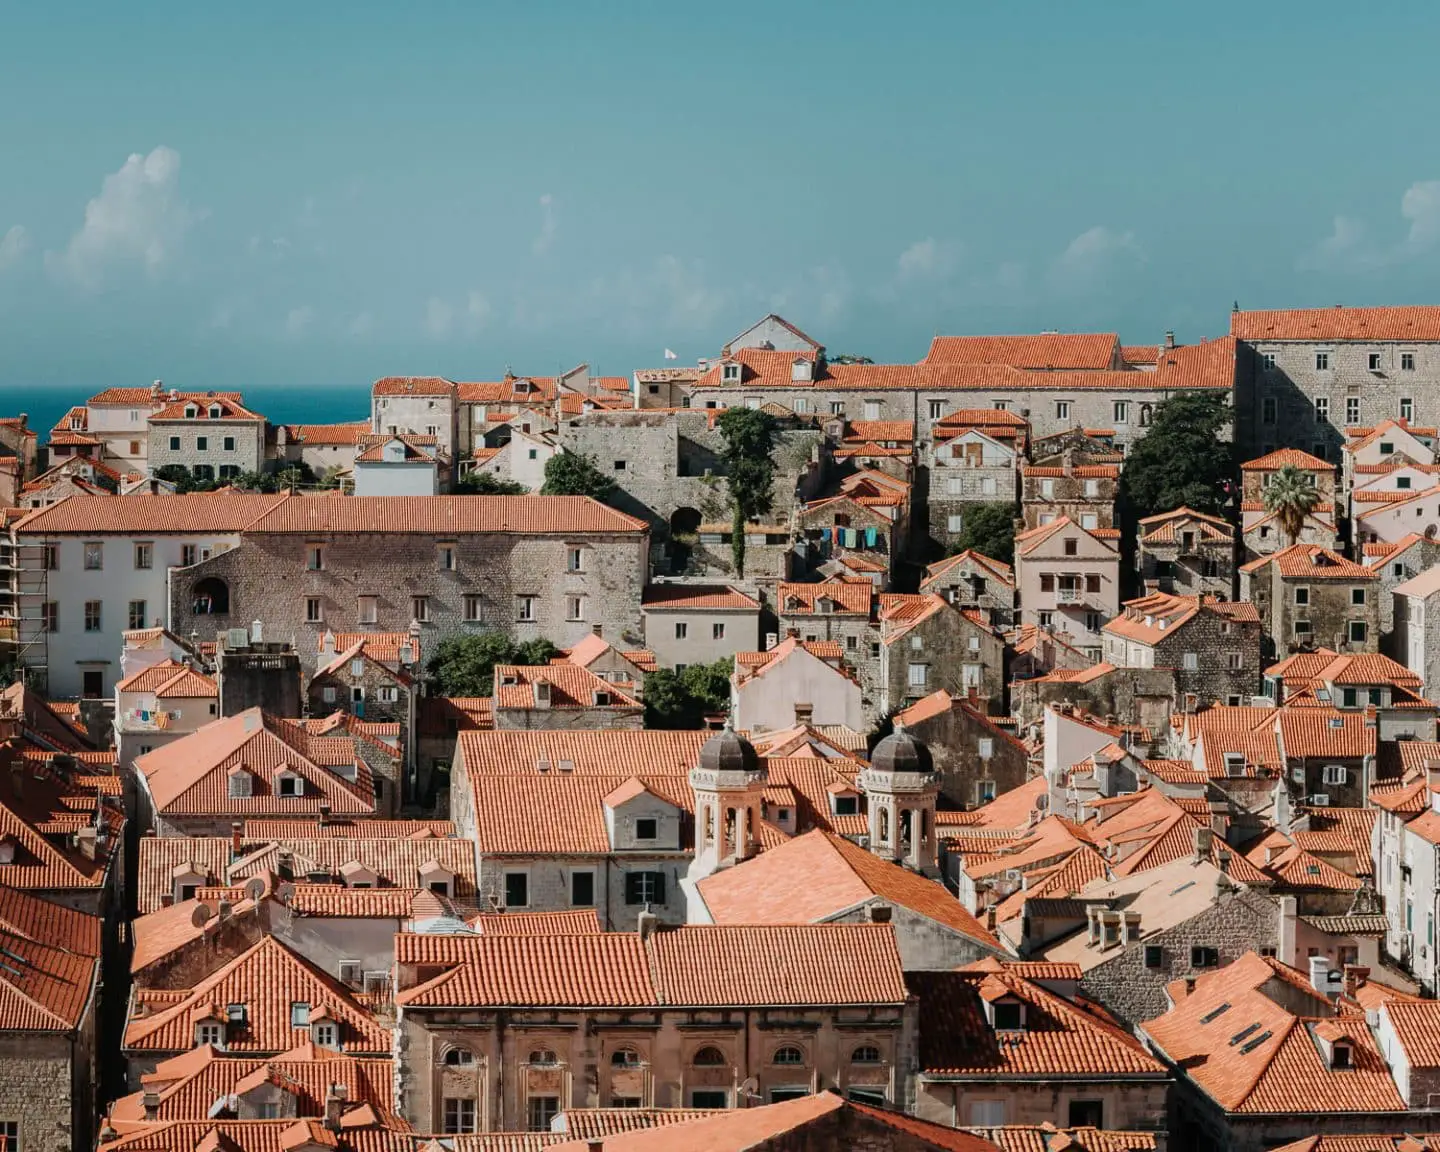 old town in dubrovnik from above